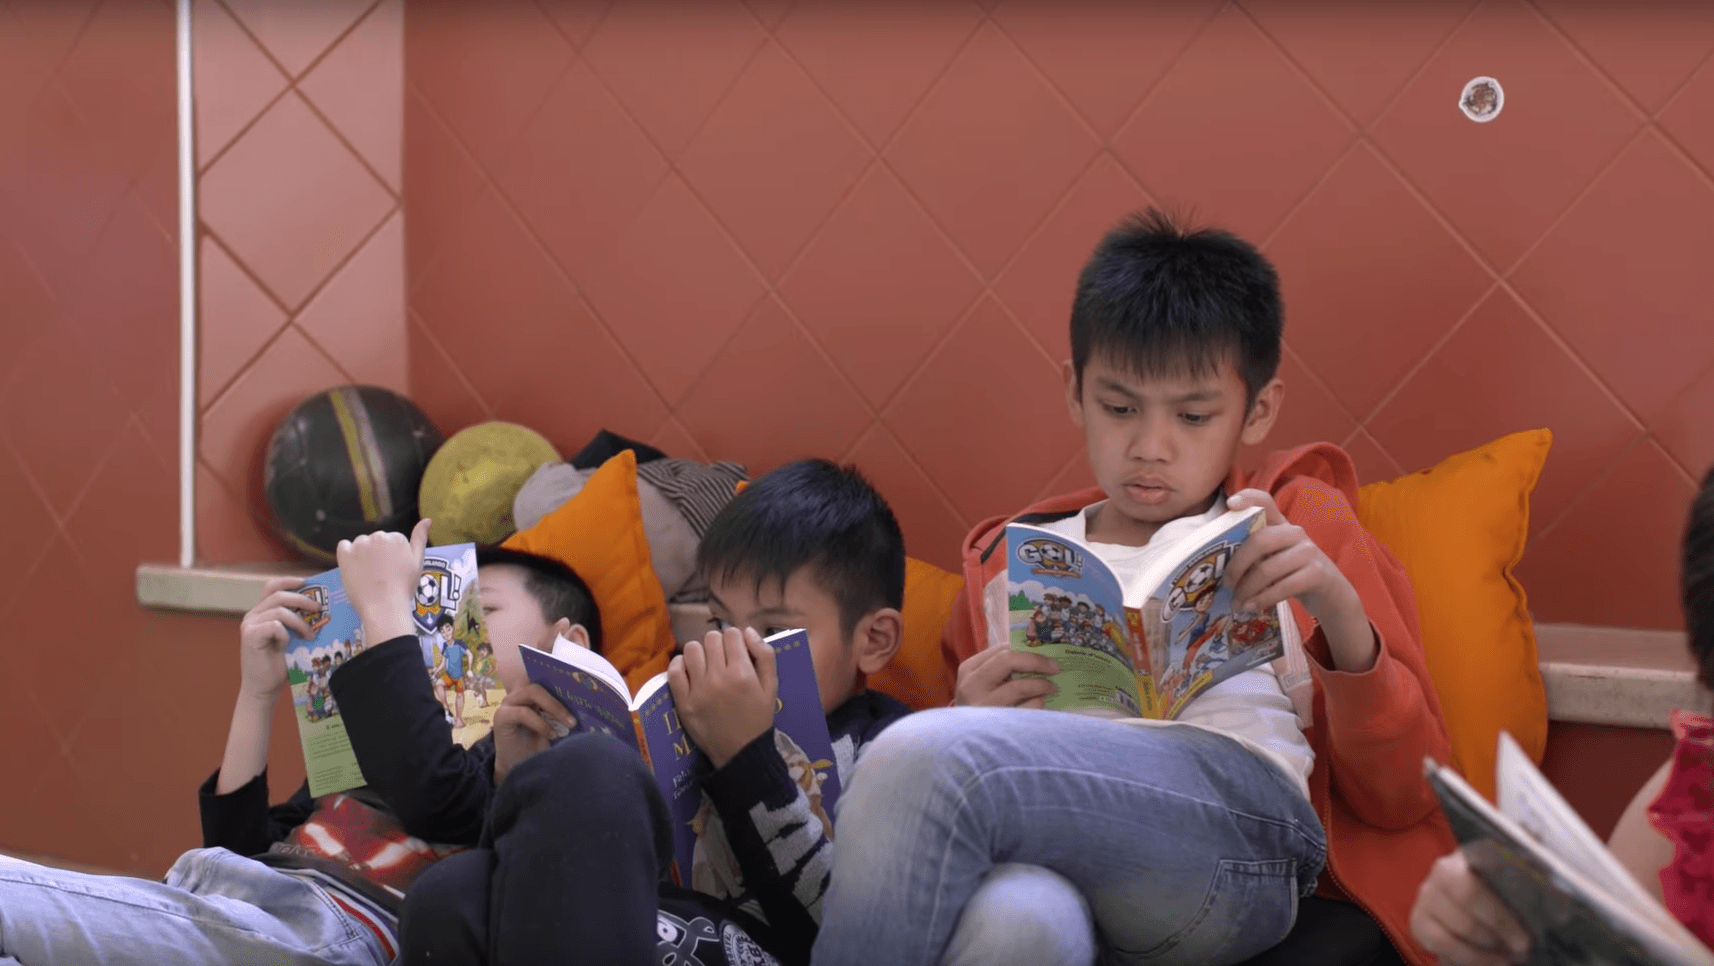 Three young boys enjoying reading their books on World Book Day